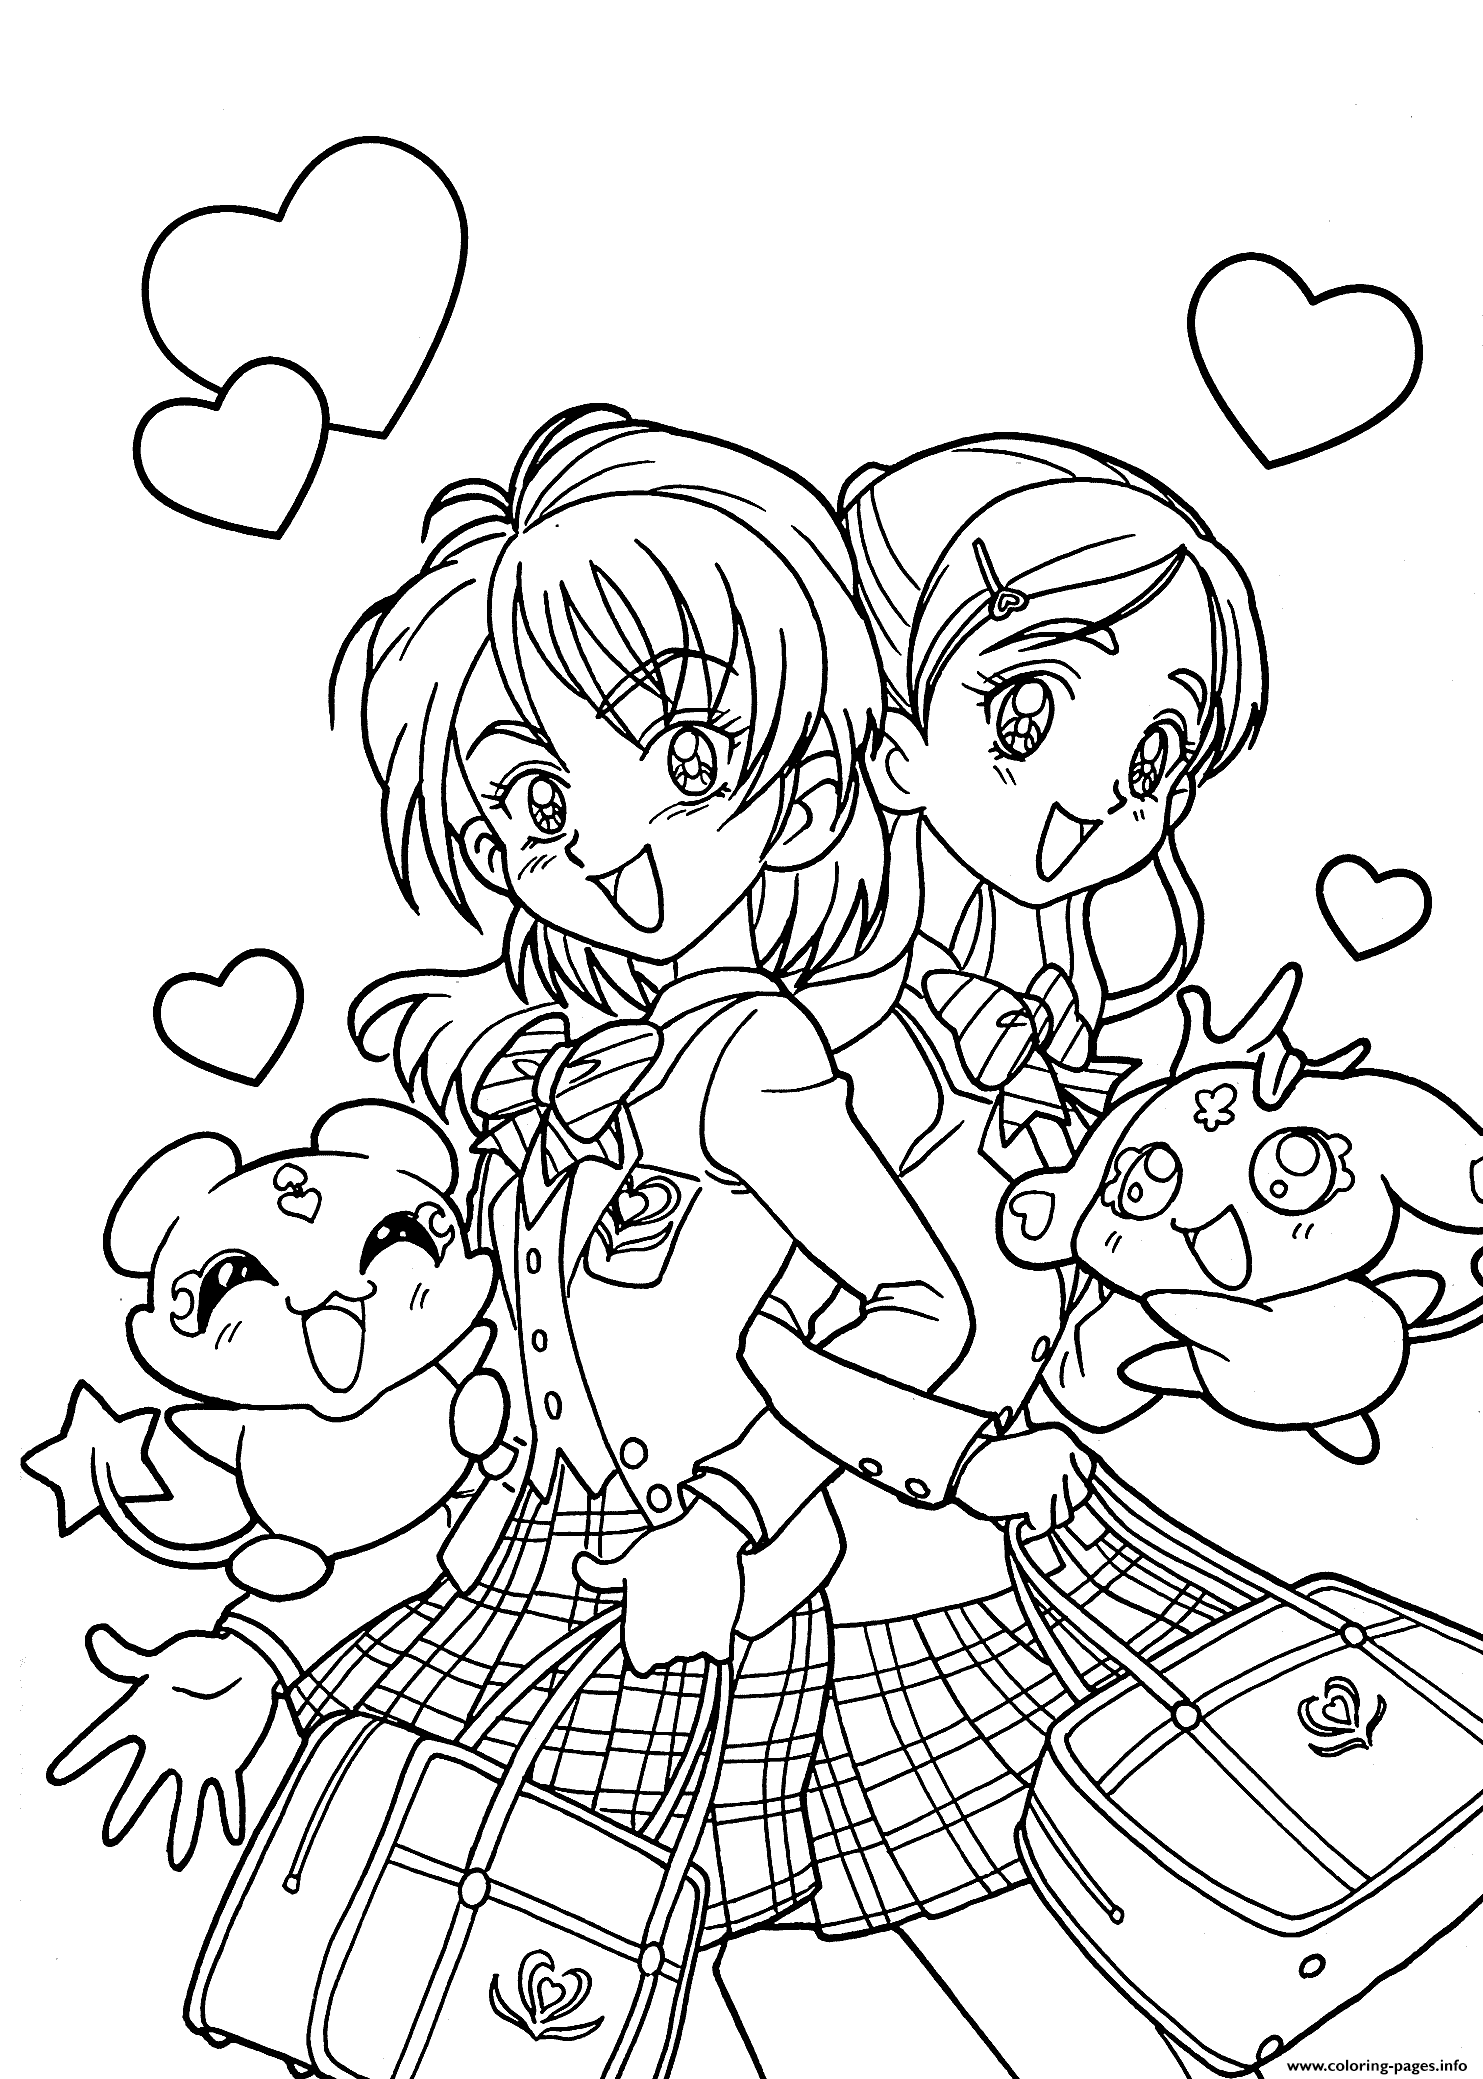 Funny Pretty Anime Girls Coloring Pages Printable